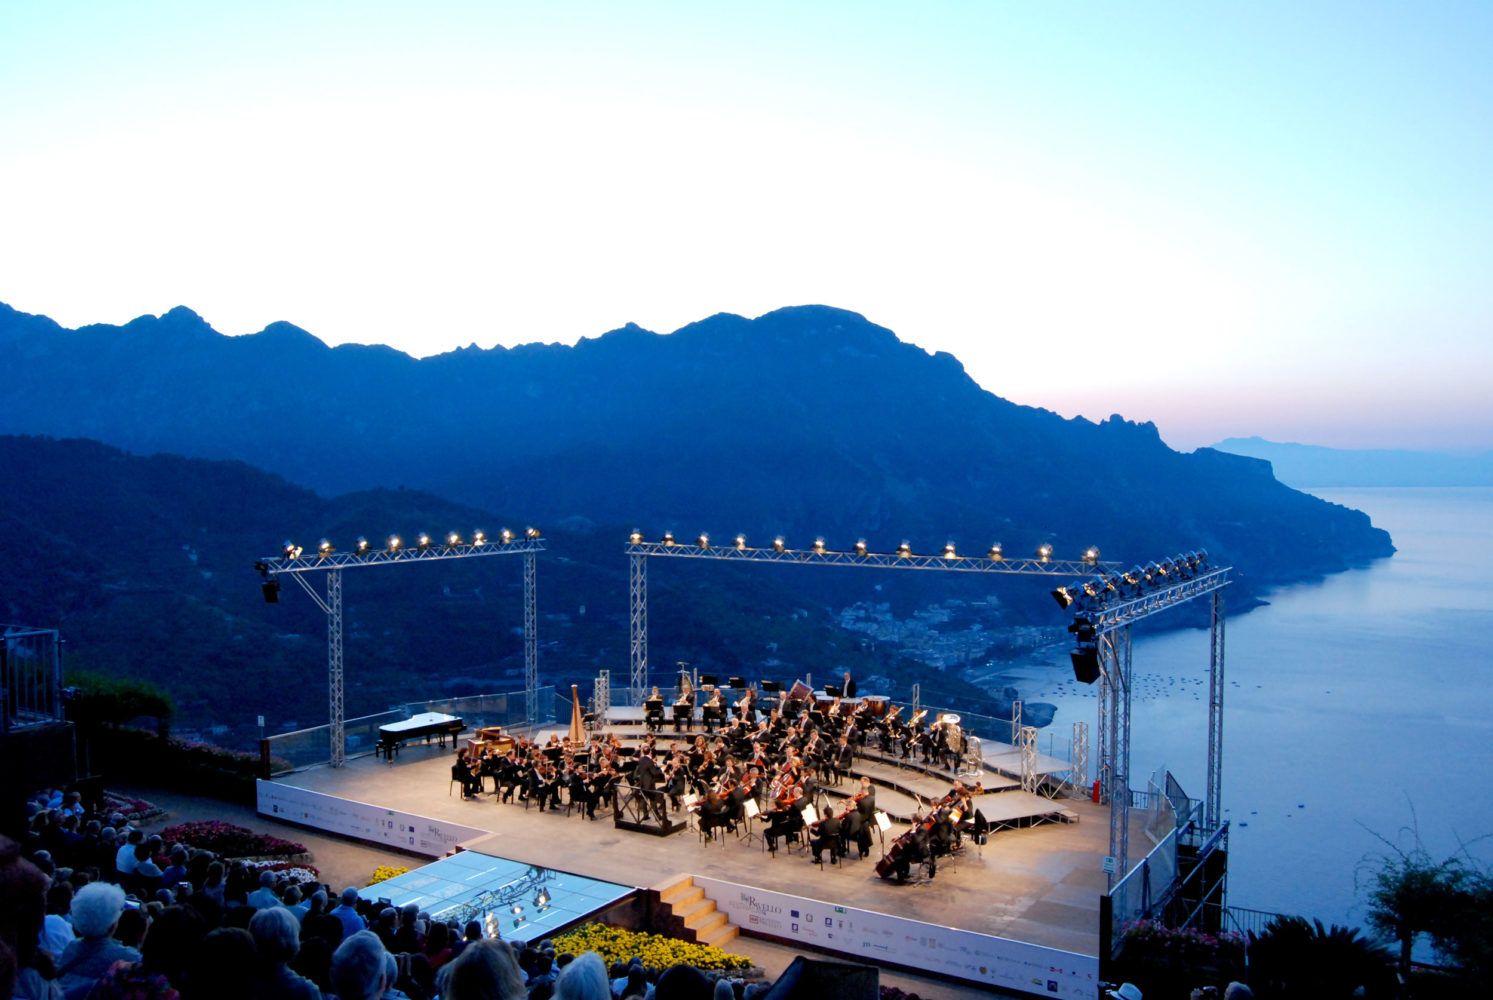 Looking down onto the crowd at an orchestra playing on the outdoor stage with the Amalfi coastline for a backdrop